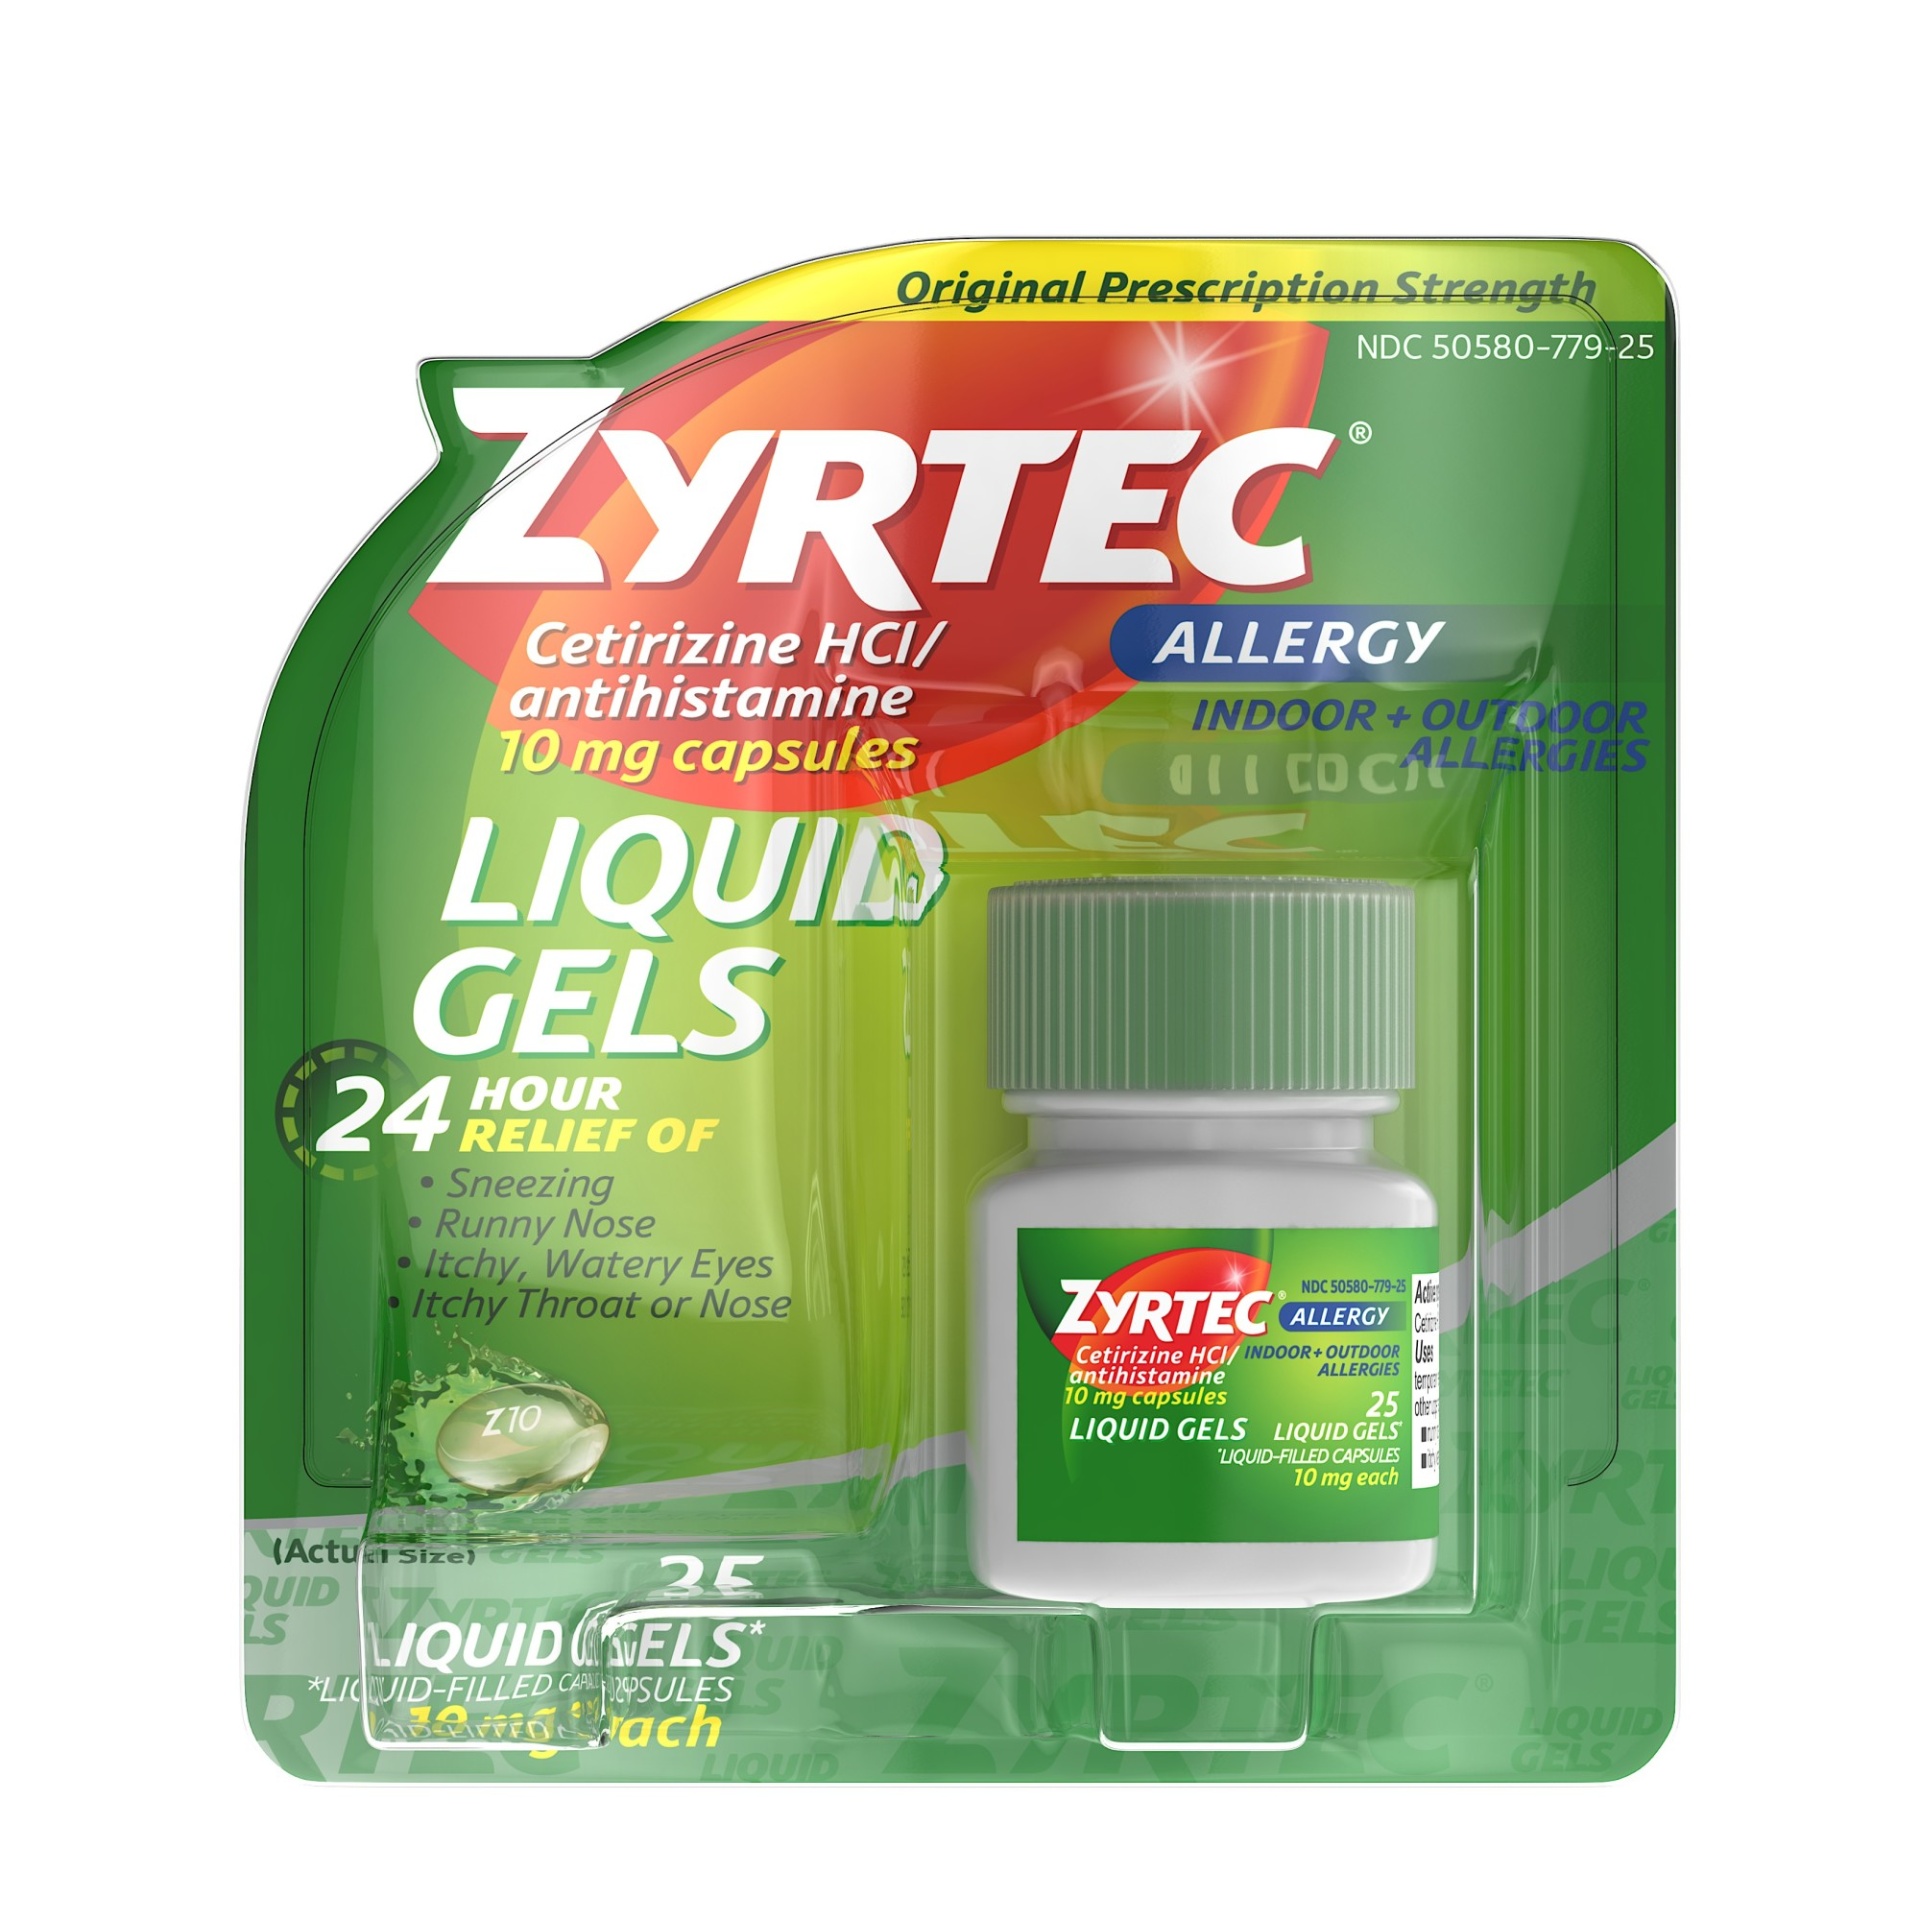 slide 1 of 6, Zyrtec 24 Hour Allergy Relief Liquid Gels, Antihistamine Capsules with Cetirizine HCl Allergy Medicine for All-Day Relief from Runny Nose, Sneezing, Itchy Eyes & More, 25 ct